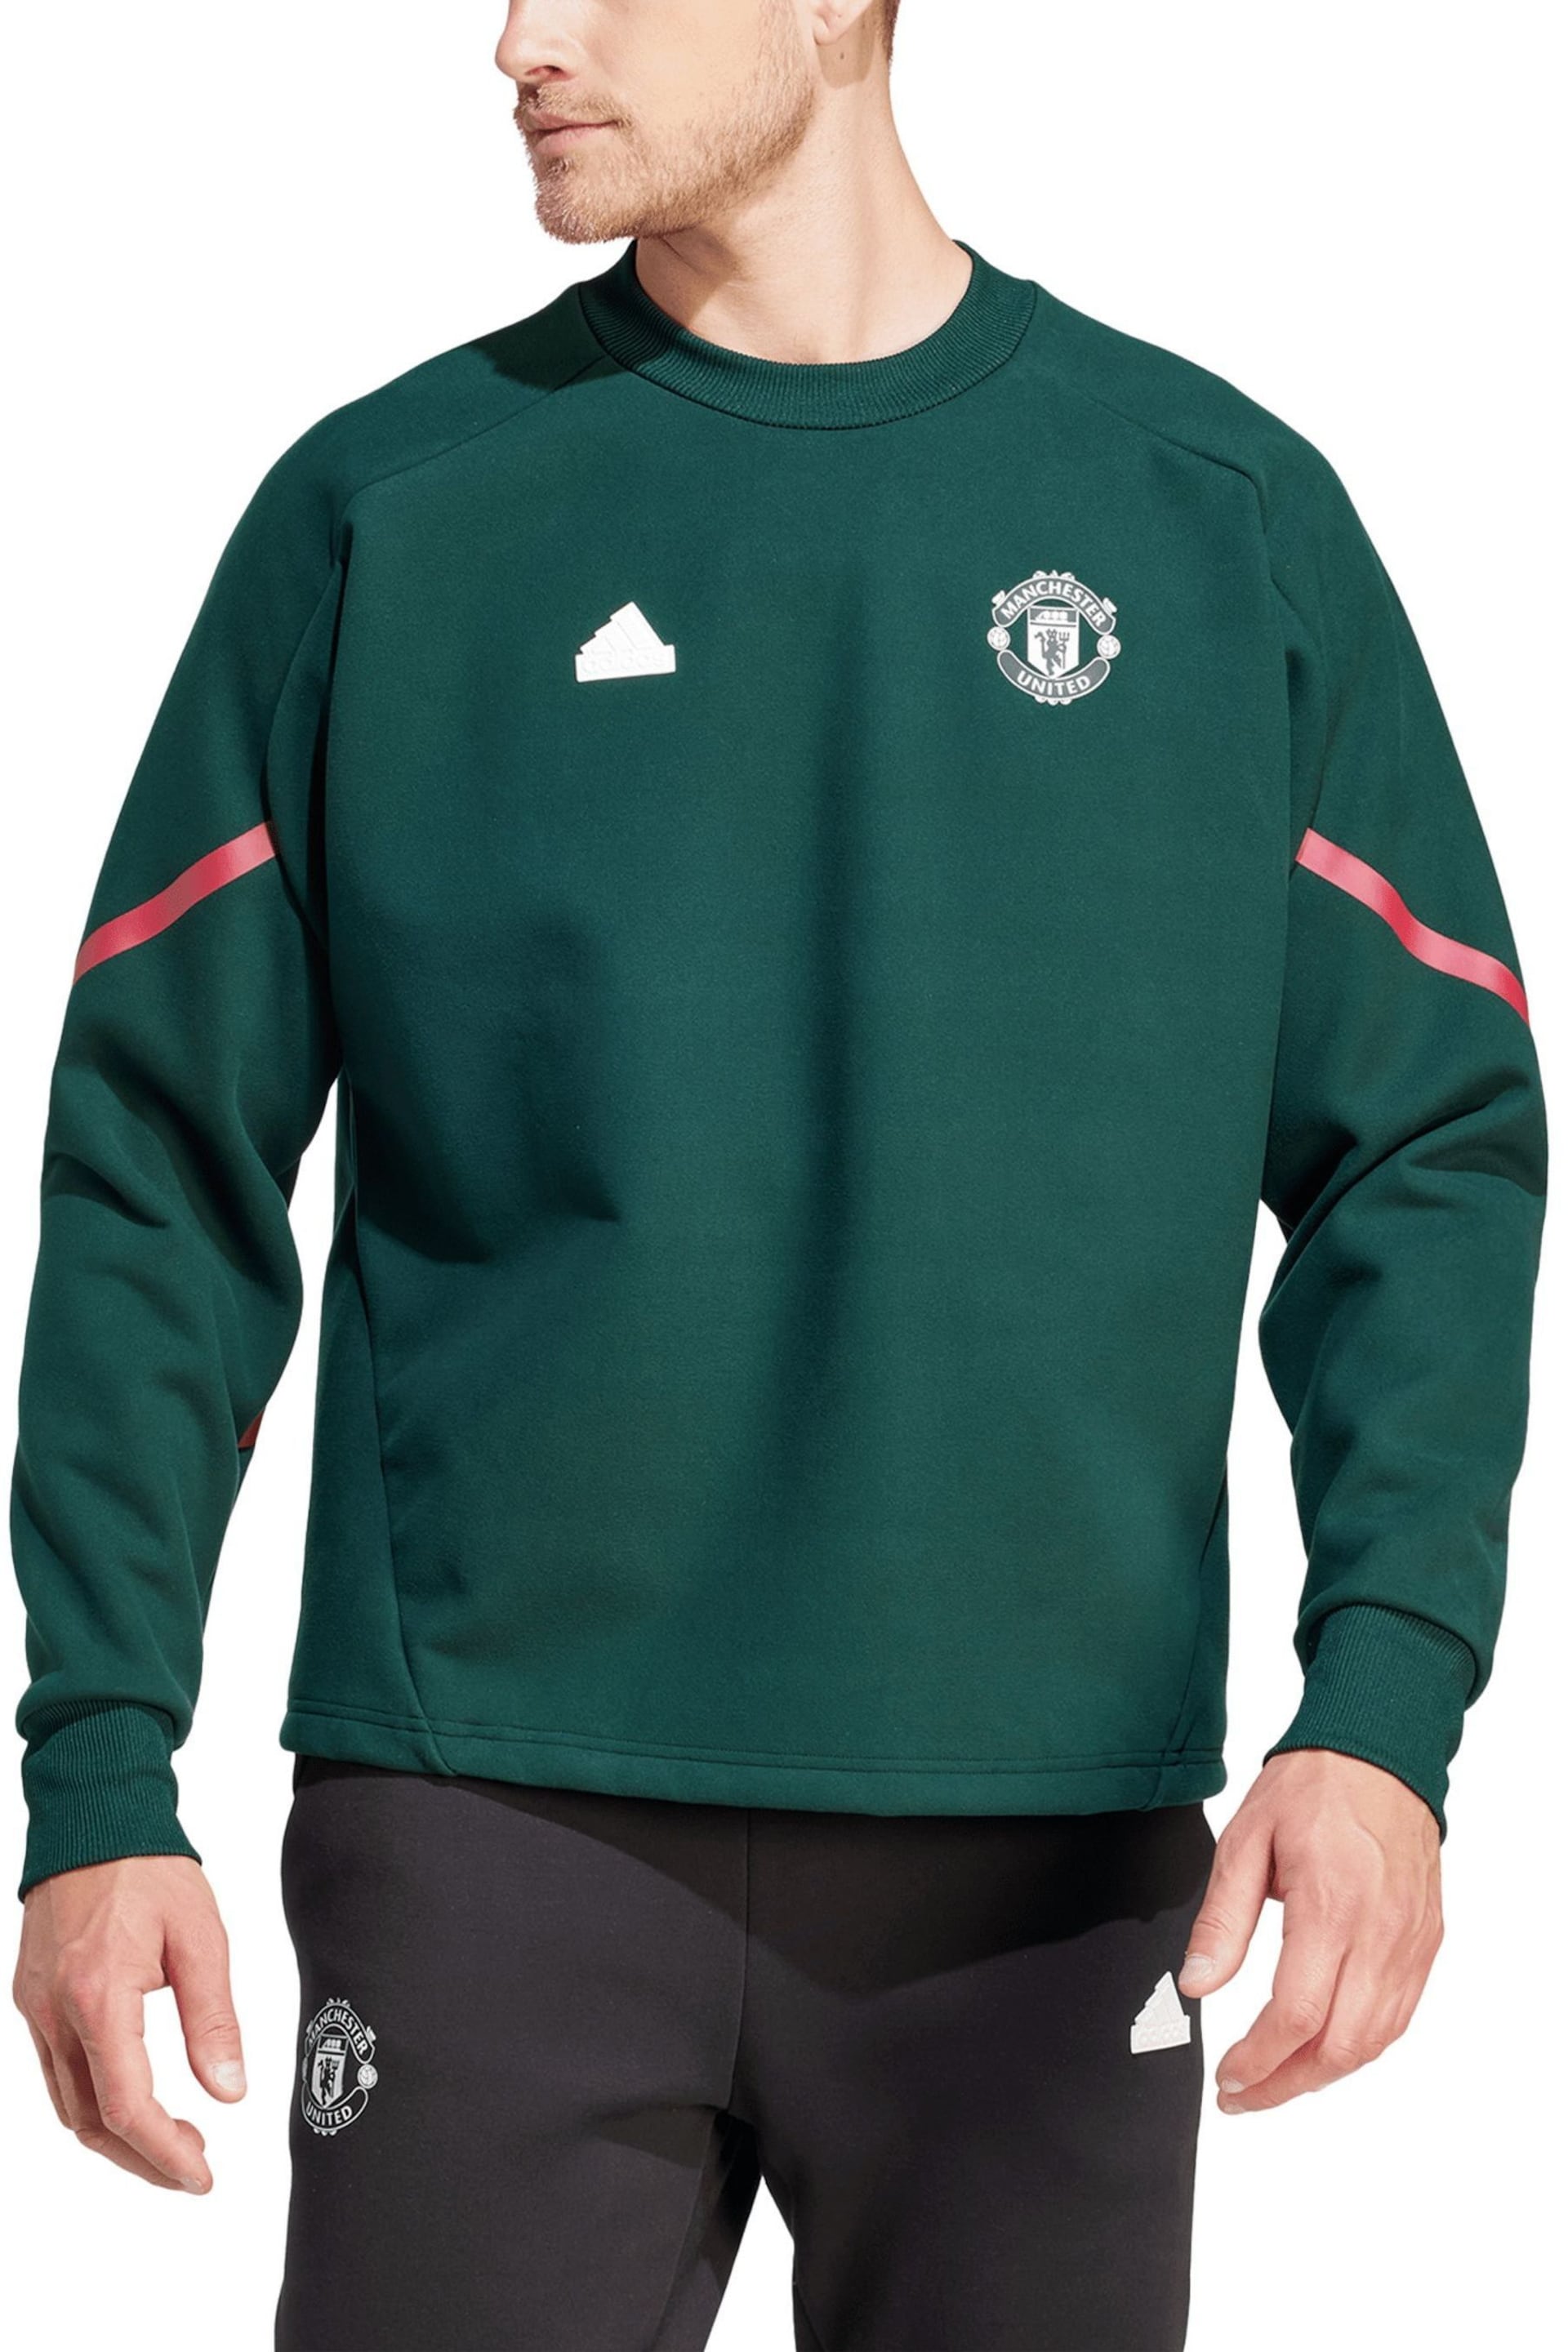 adidas Green Manchester United D4GMDY Travel Sweatshirt - Image 1 of 5